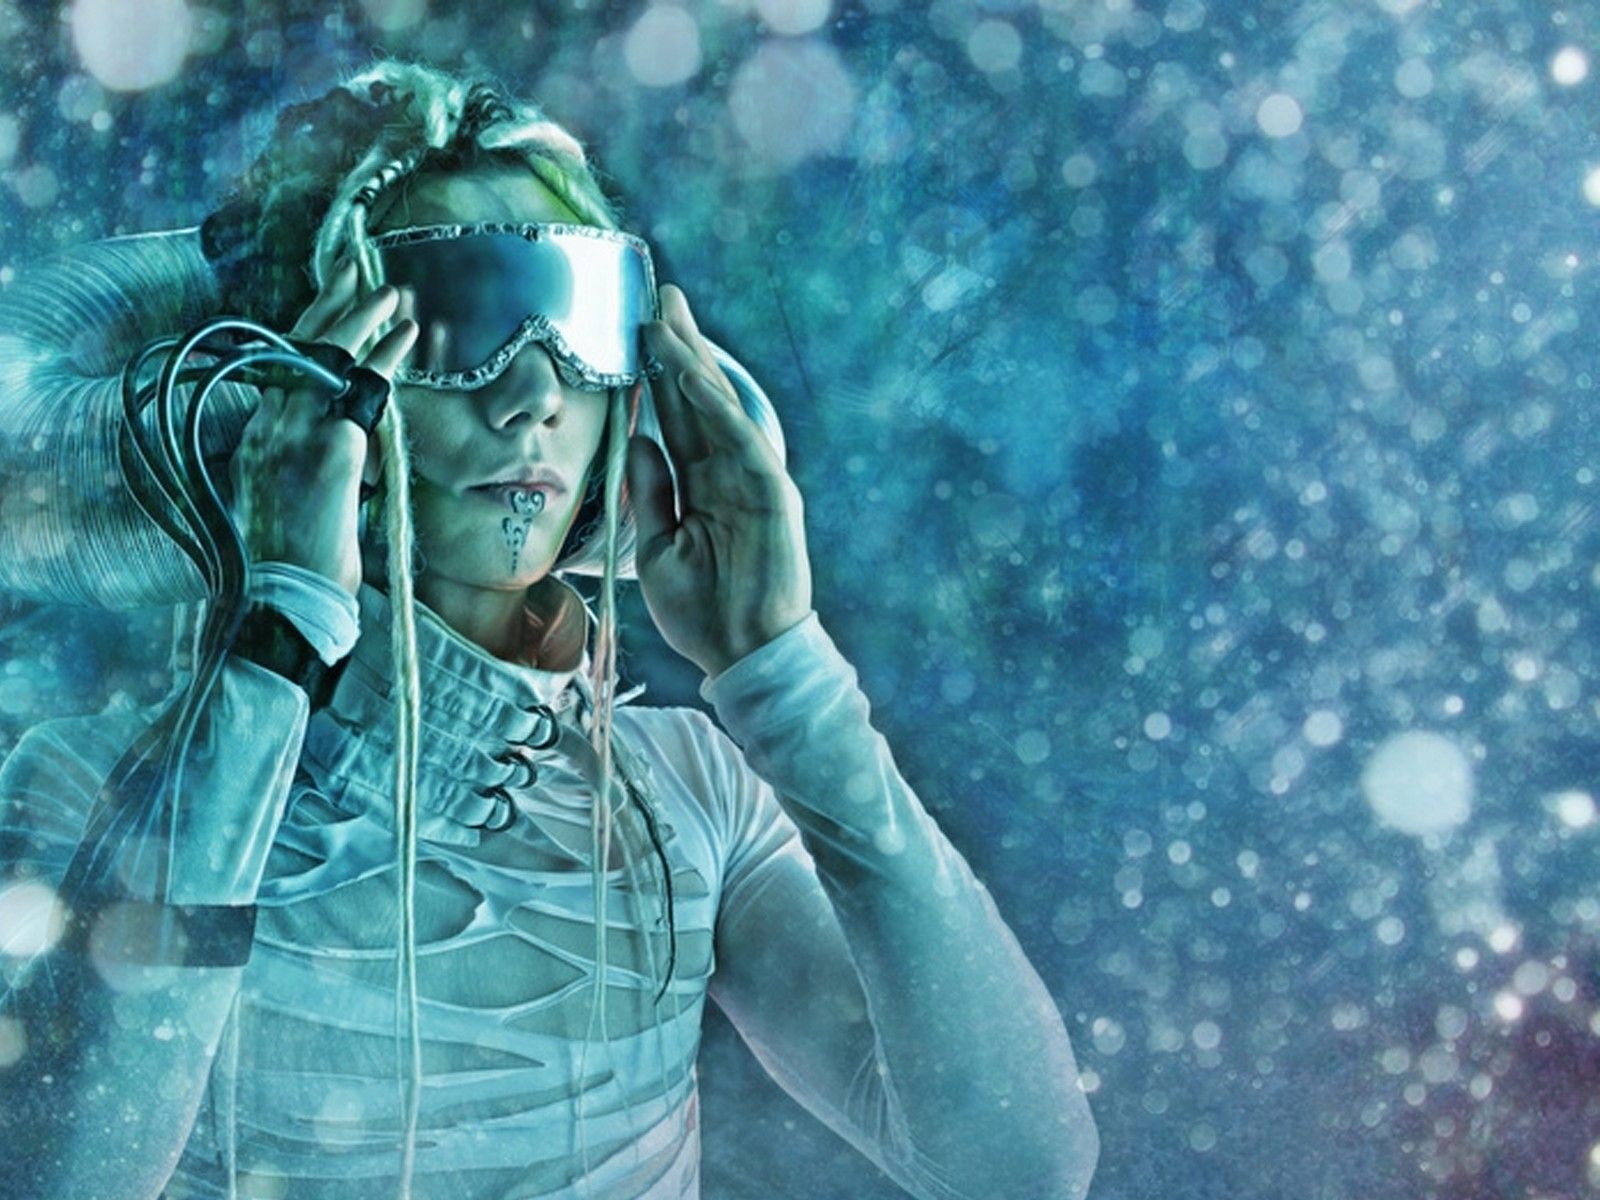 Background, Wallpaper, Cyborg, Fi, Drops, iPhone, Face, Cg, Manipulations, colourful, Fantasy, Sci, Girl, , Science, Futuristic, Flakes Glas